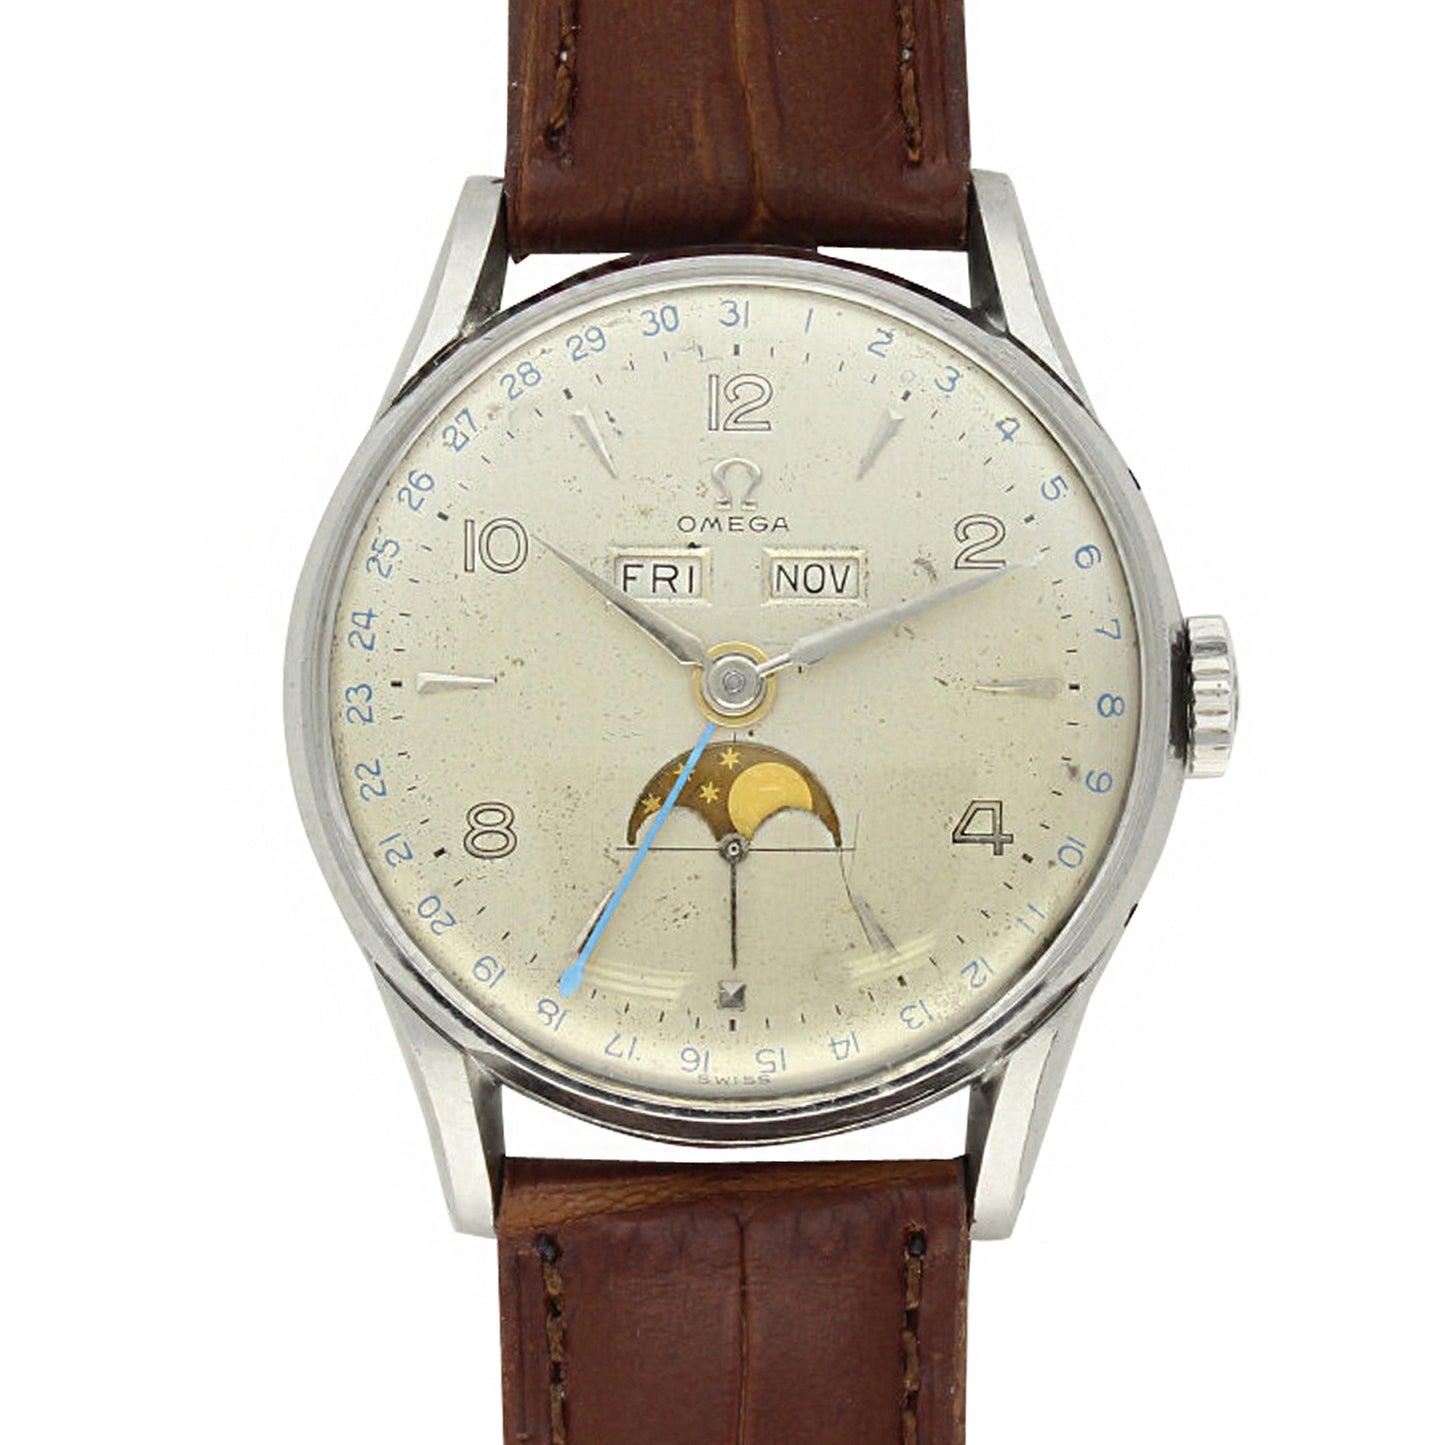 Stainless steel Cosmic Triple Date Calendar Moonphase wristwatch. Made 1949